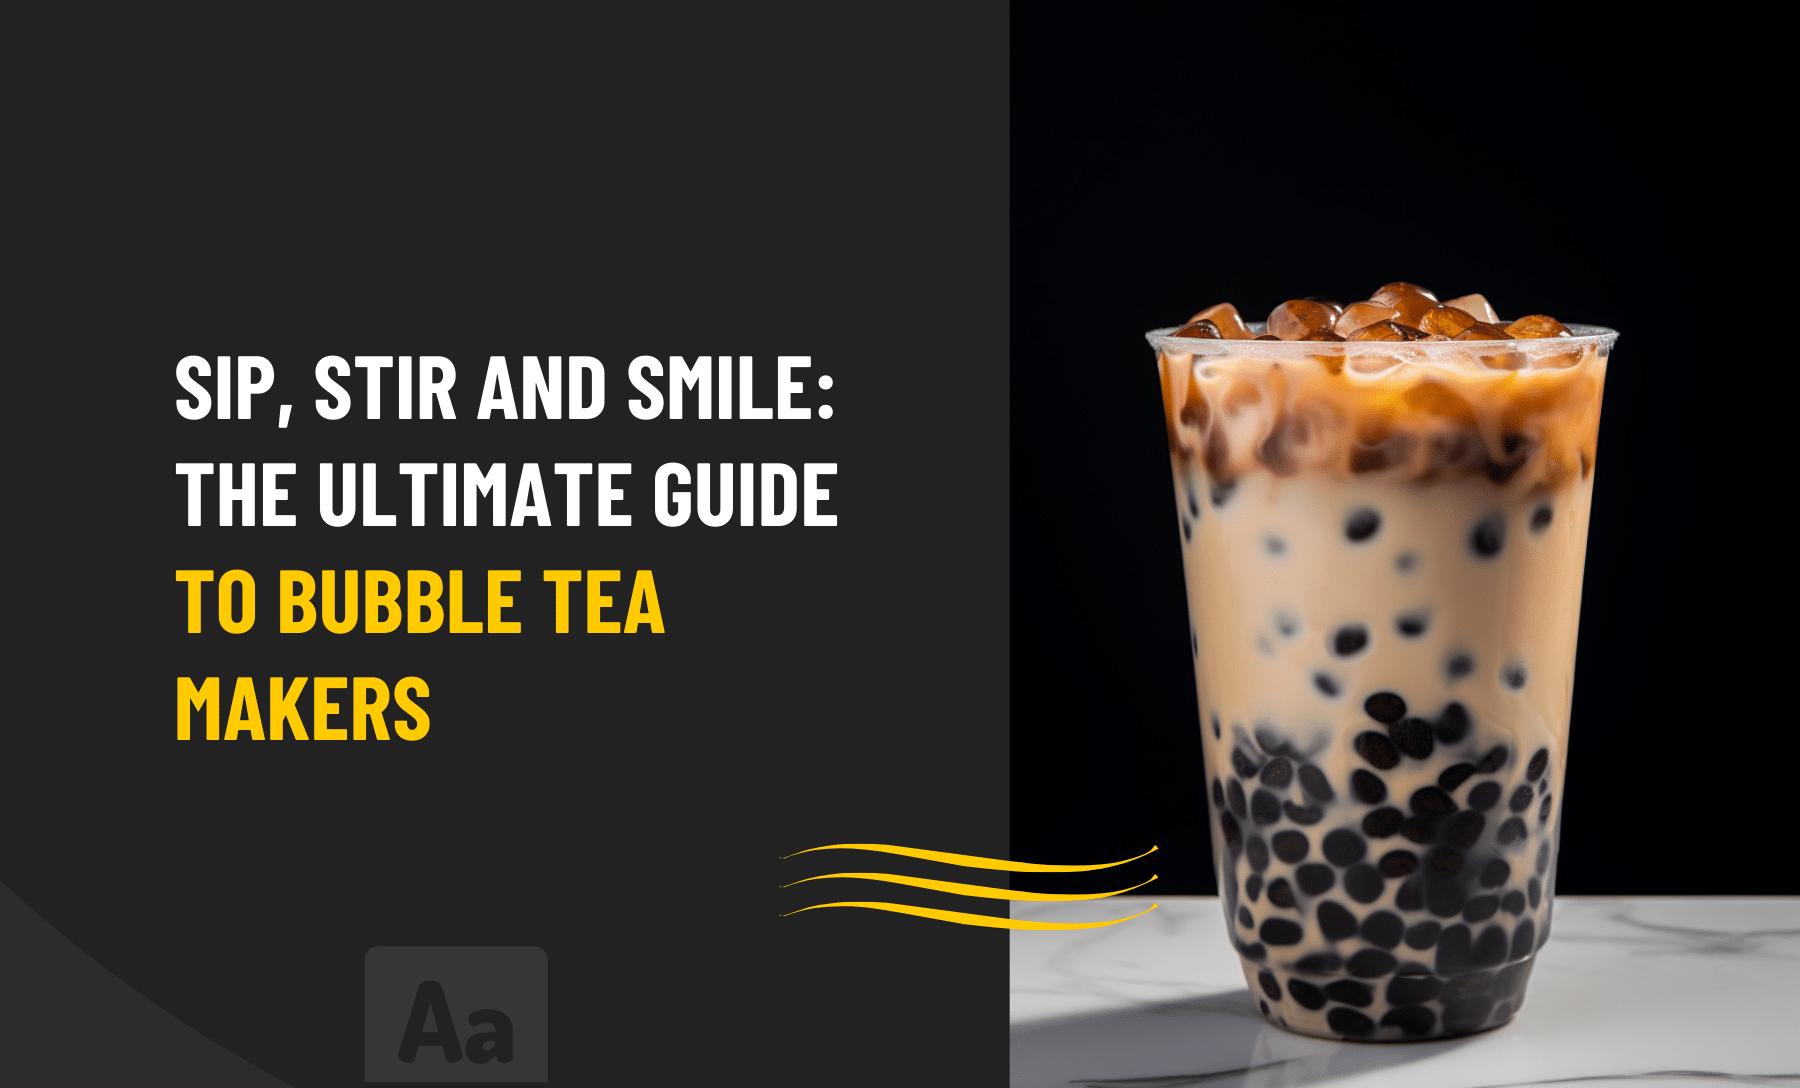 Guide to Bubble Tea Makers